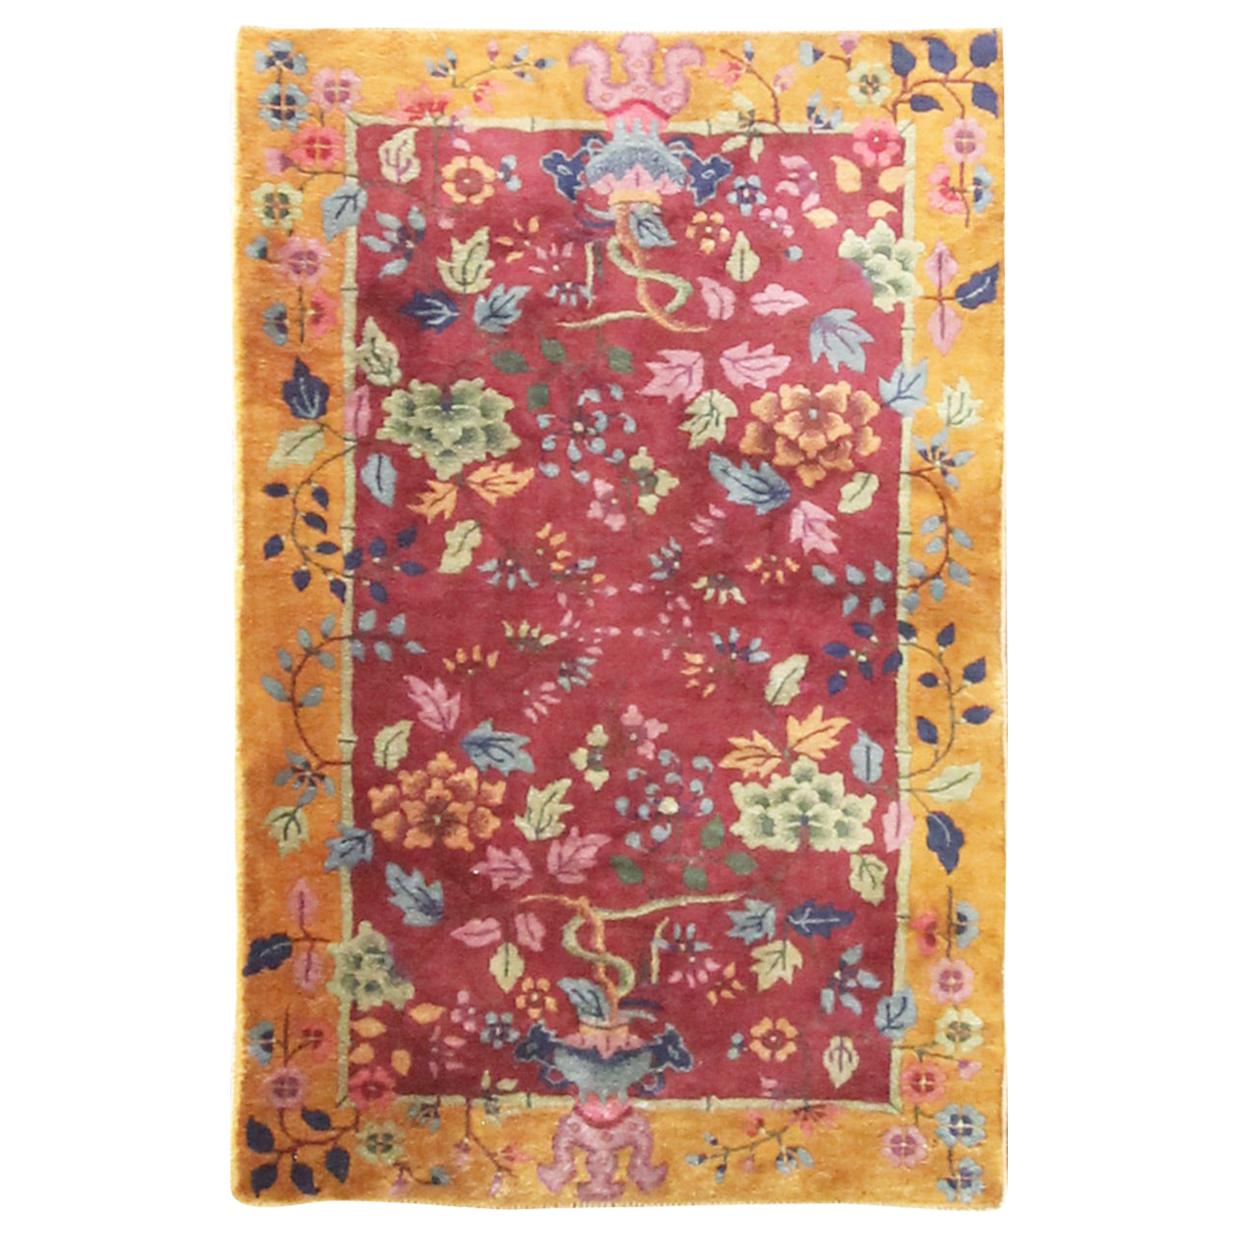 Antique Art Deco Chinese Rug, the Paradise